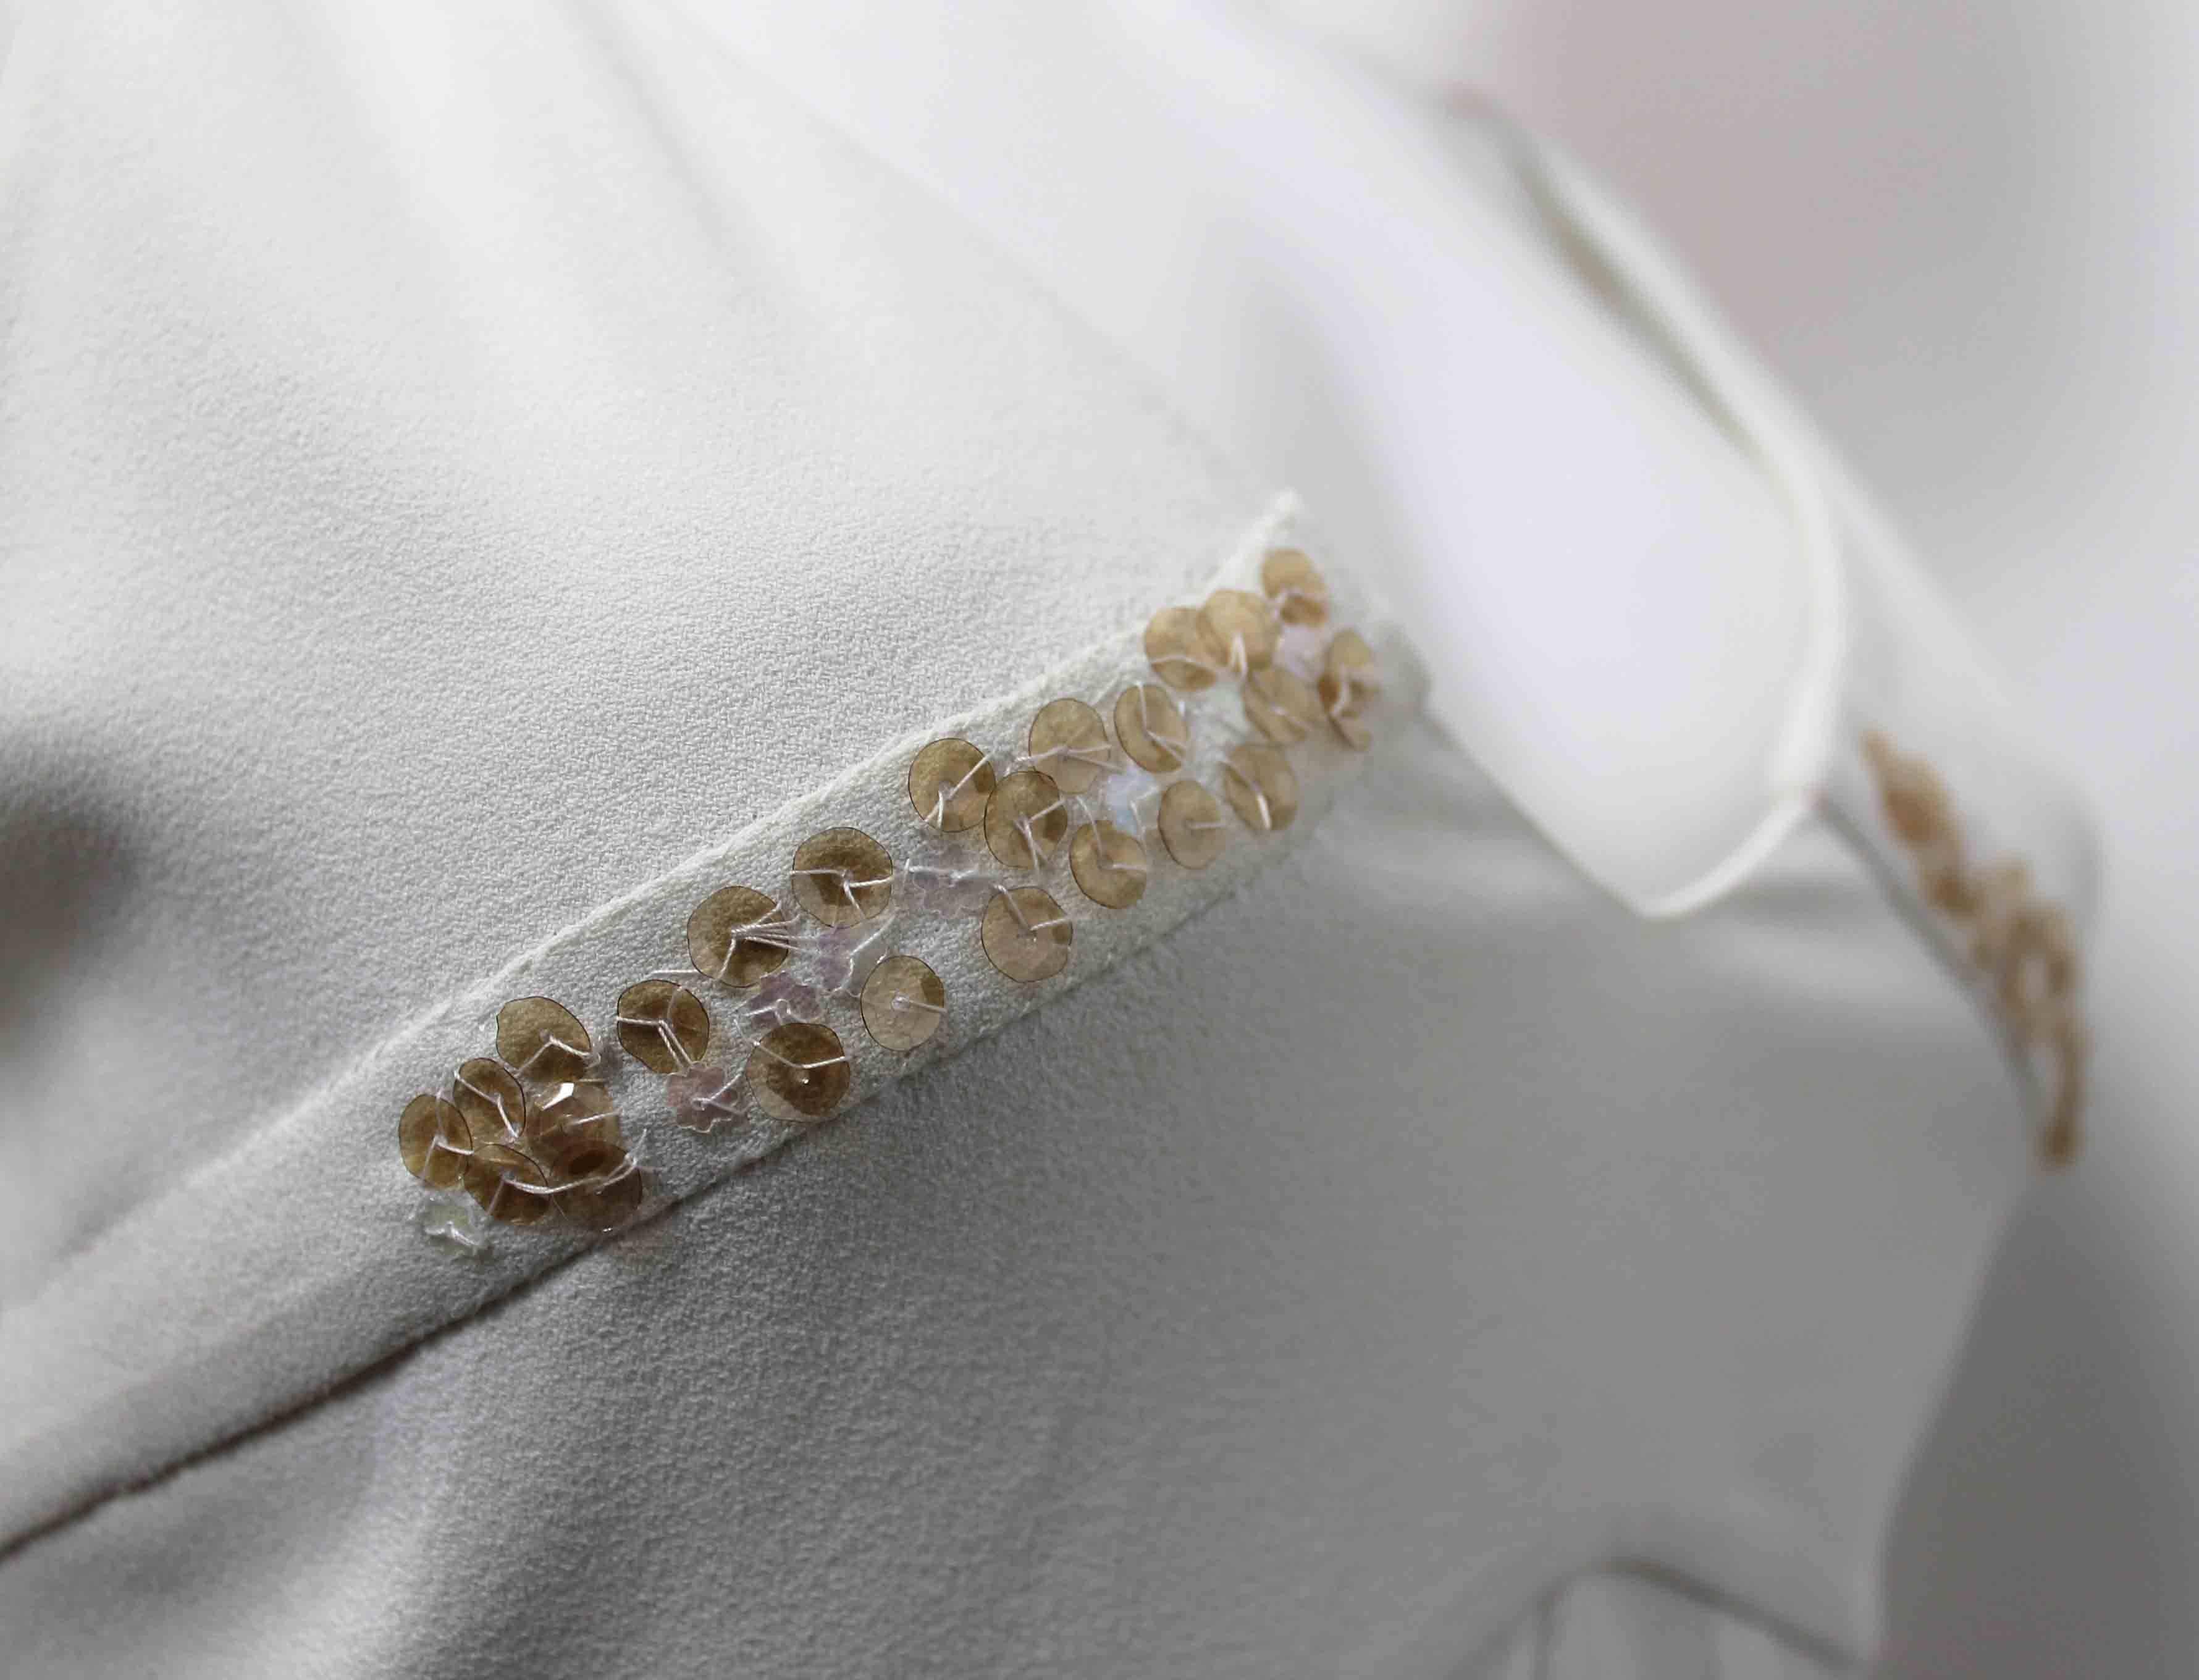 Christian Dior White Silk Dress c. 2005 In Excellent Condition For Sale In London, GB